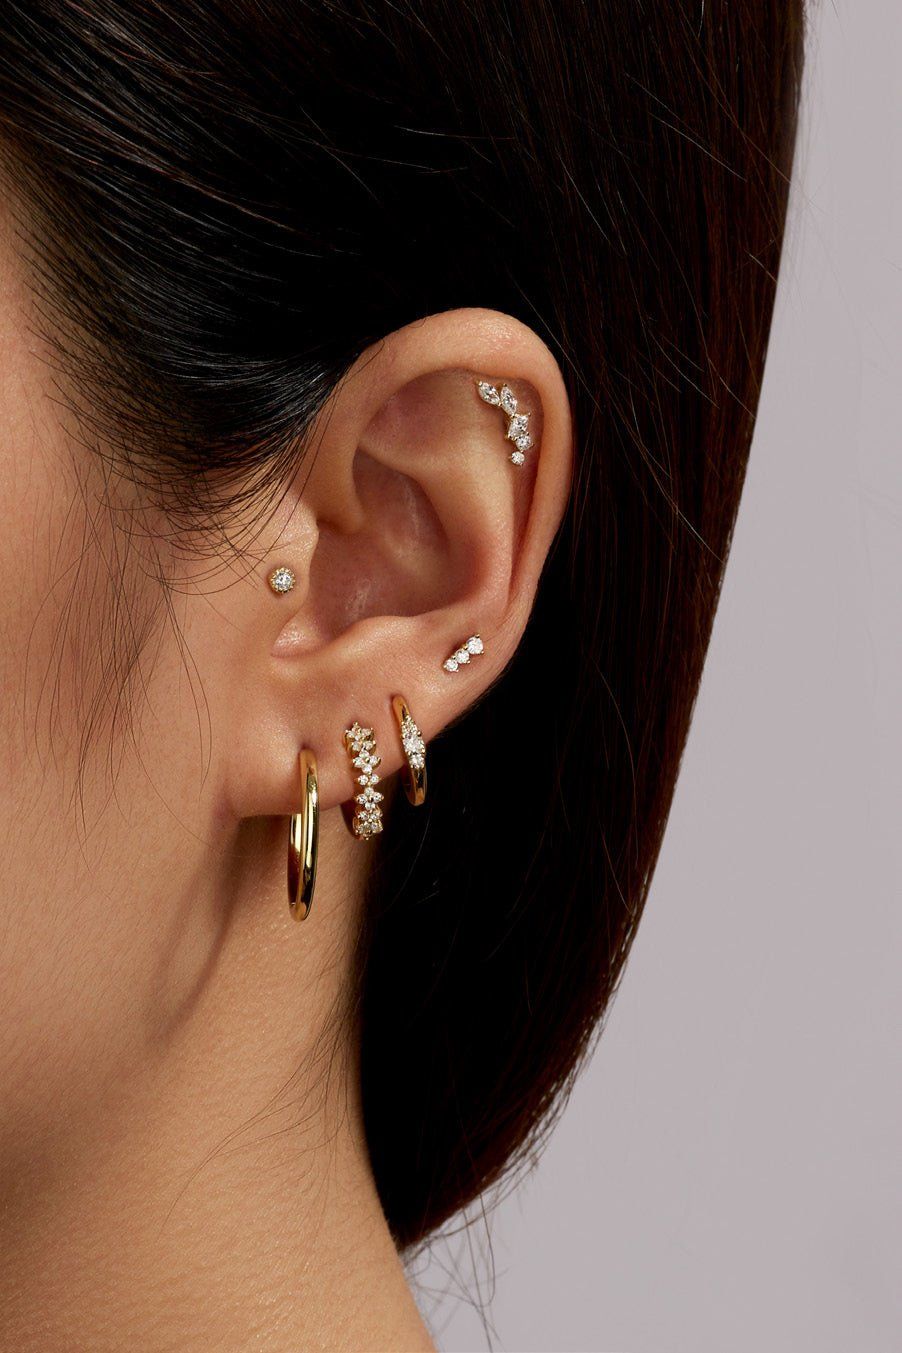 a close up of a person wearing a pair of ear piercings